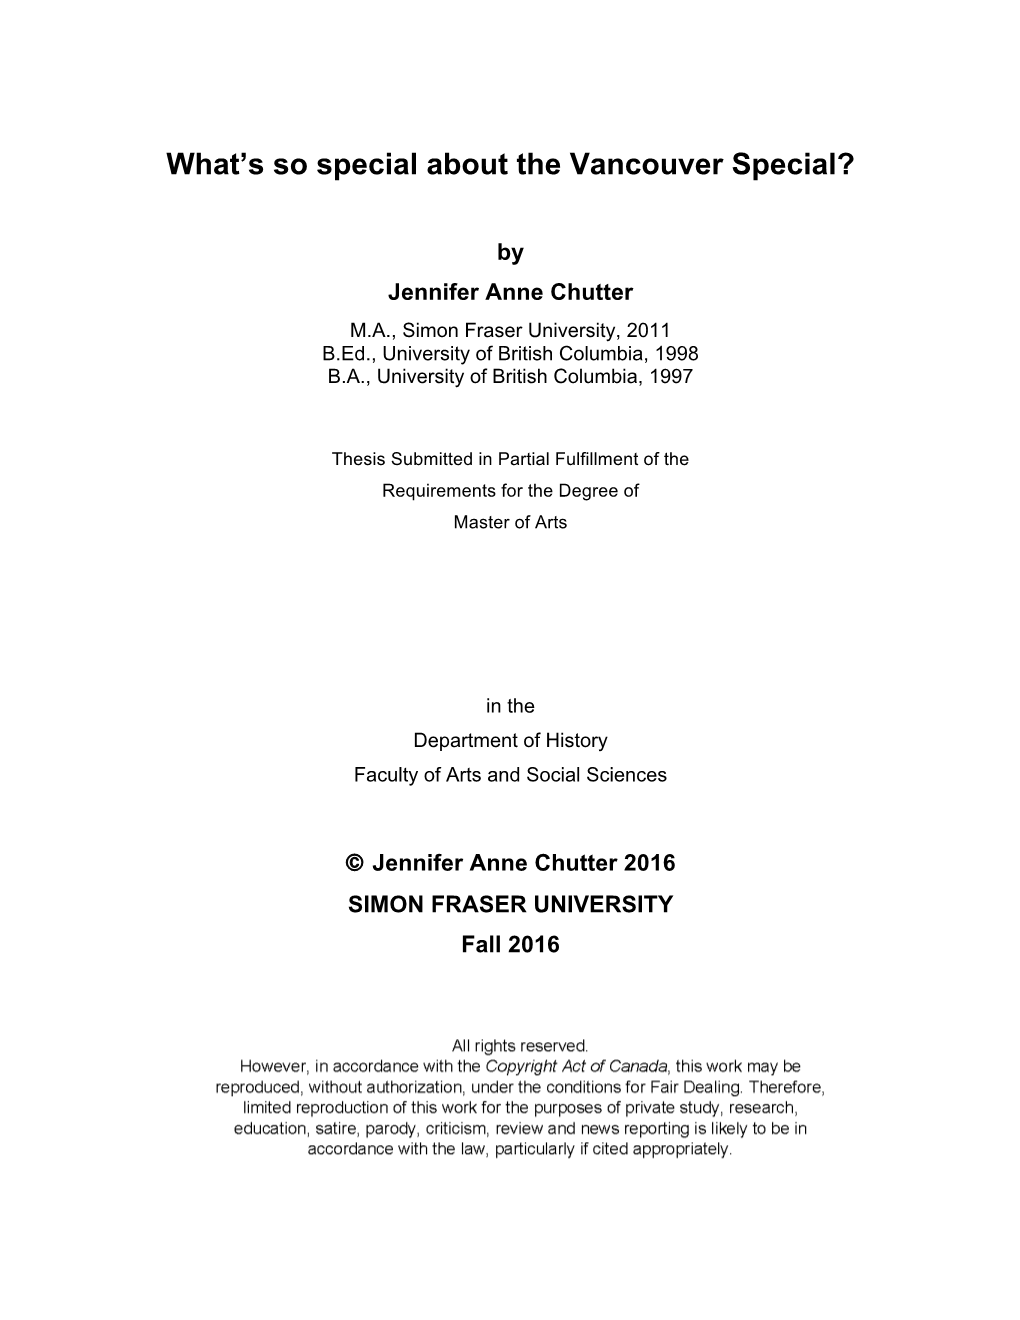 The Vancouver Special?